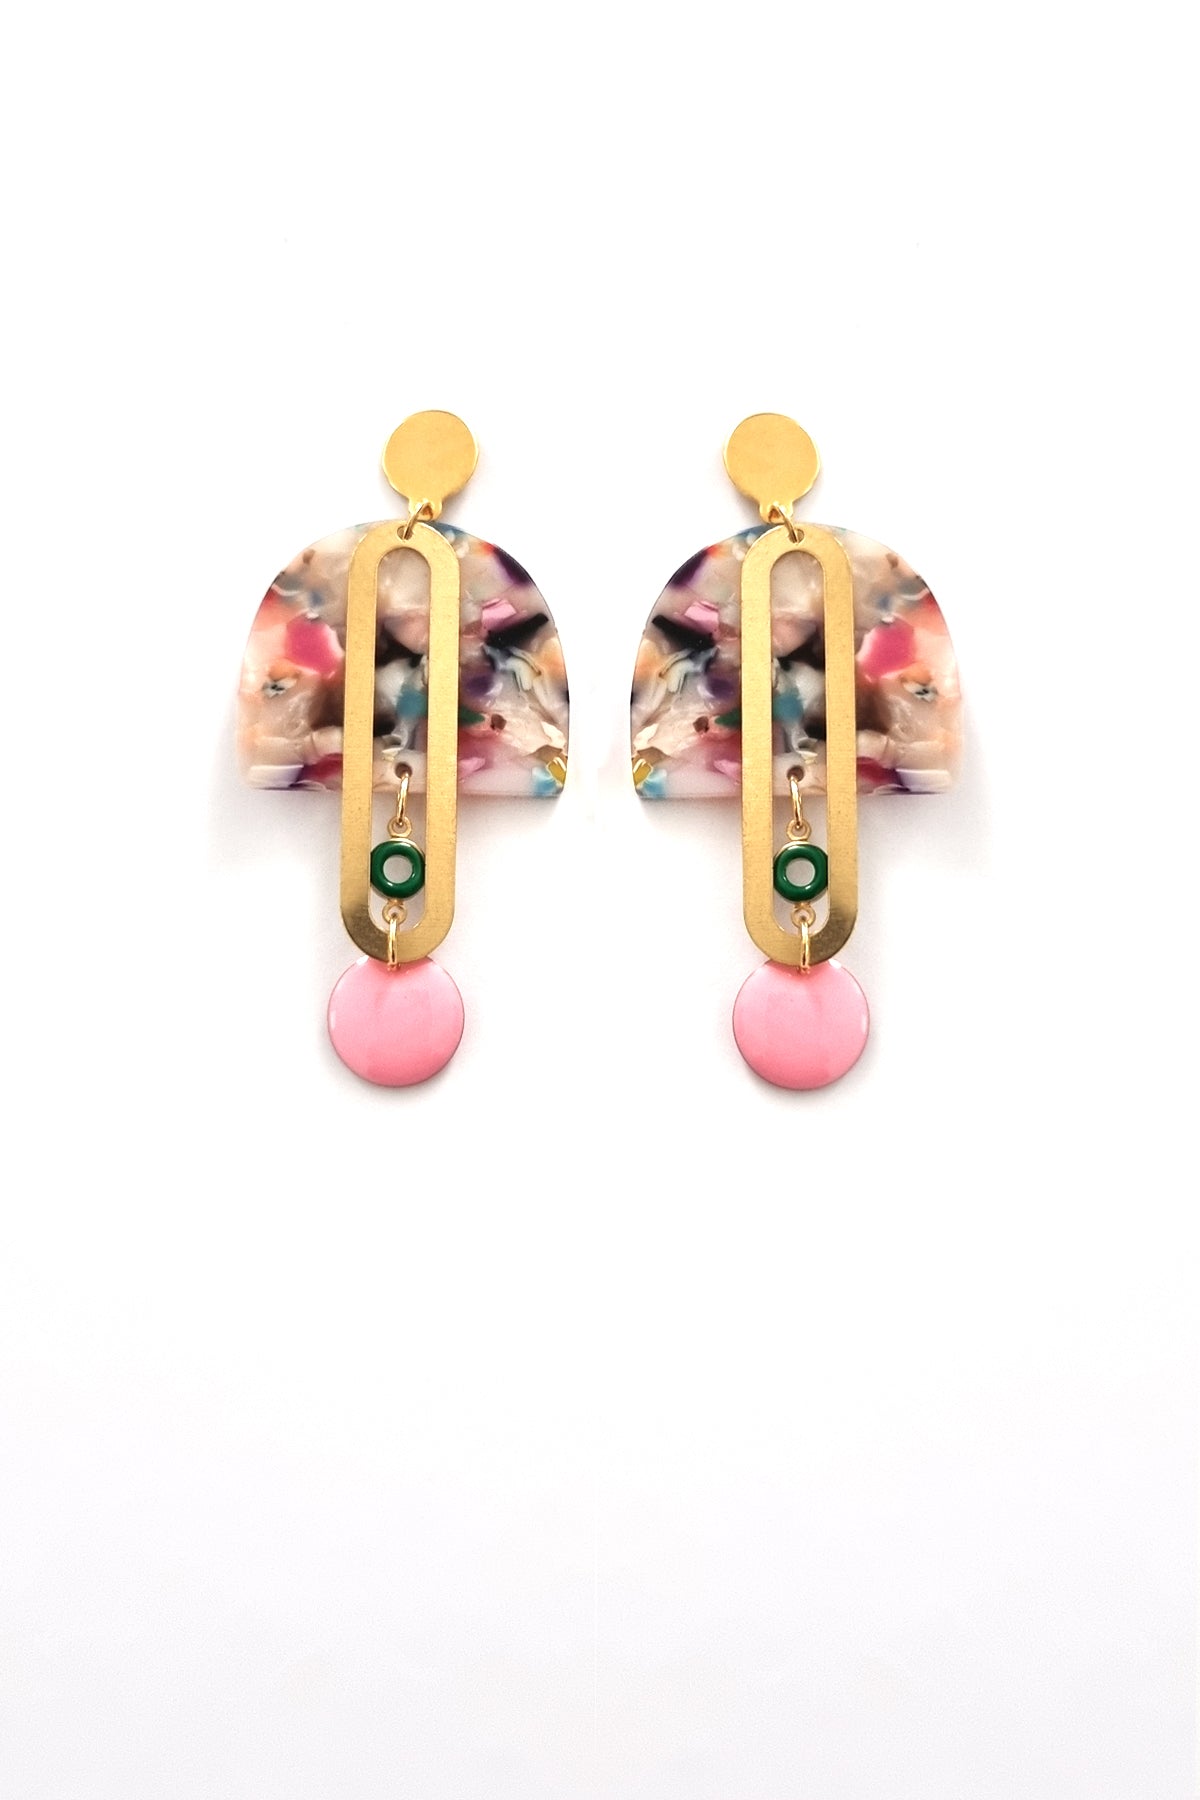 A pair of stud dangle earrings sits against a white background. They feature a multicoloured acrylic arch, an elongated oval brass piece with a small green enamel connector attaching the acrylic piece to the brass, and at the bottom hangs a pink enamel dot.